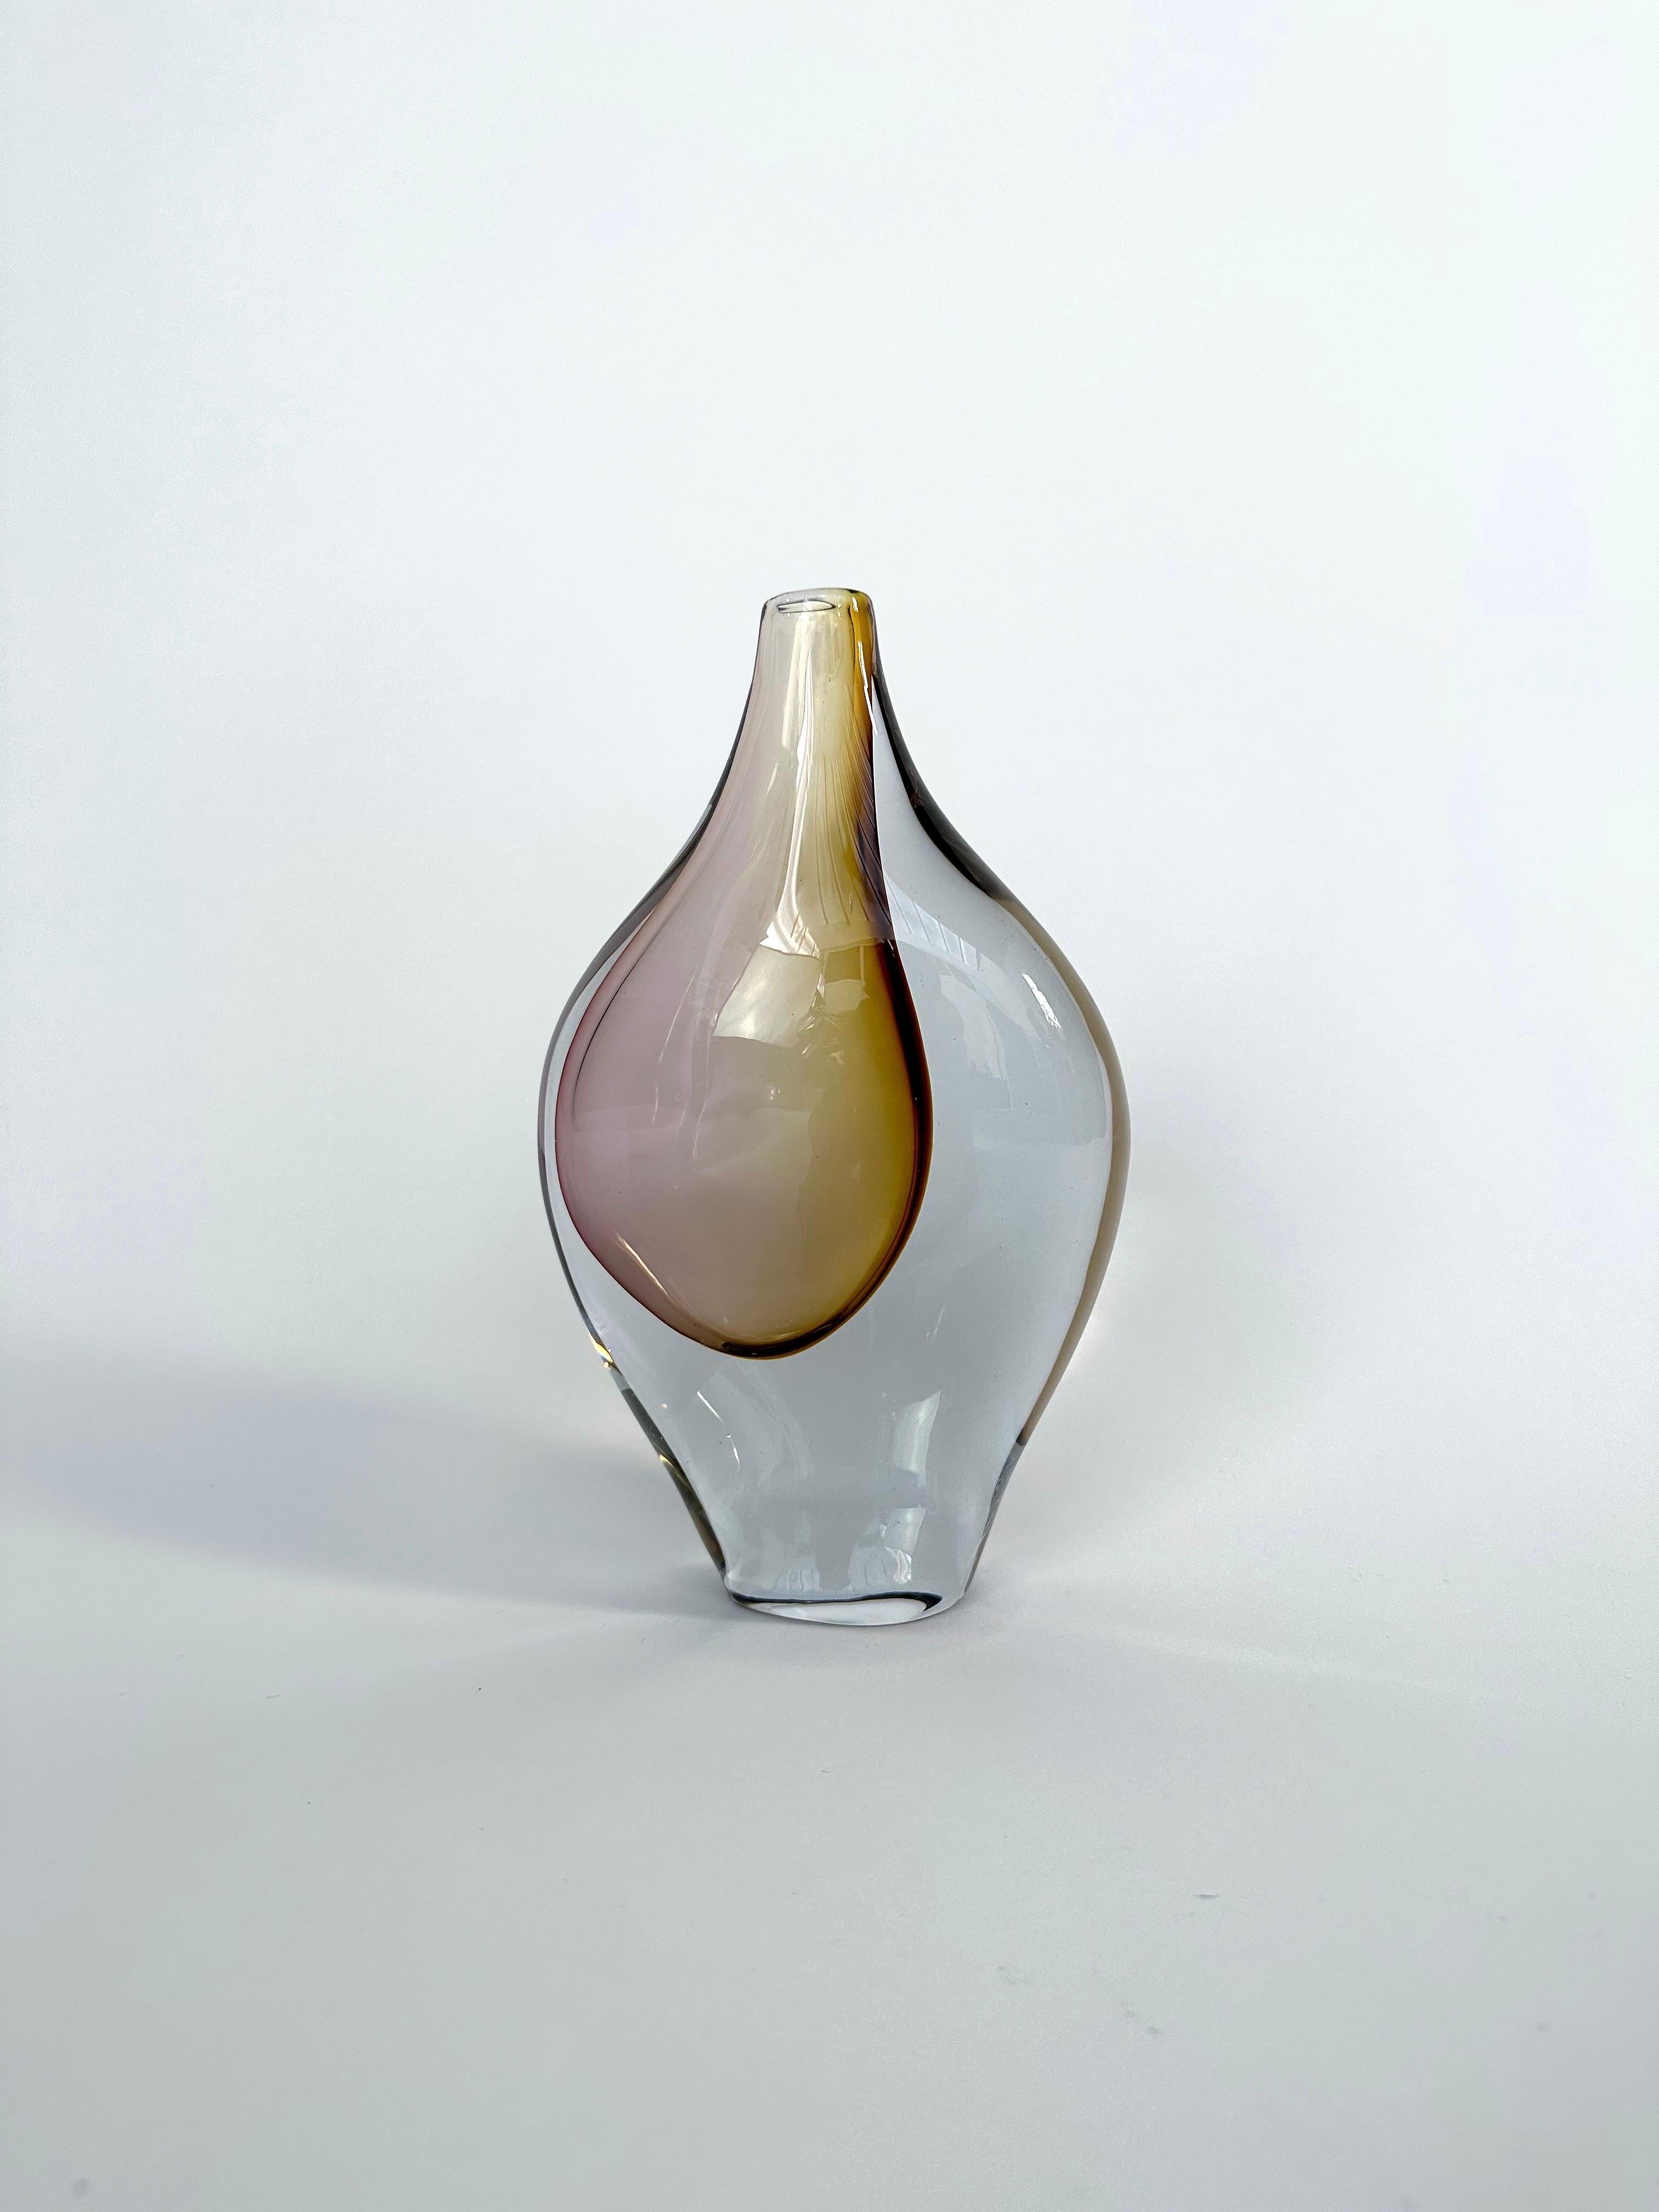 The rare model B 927 was designed by Asta Strömberg and probably influenced by Gunnar Nylund in the late 1950s, mouth-blown crystal in a beautiful apricot-rose or copper color.

Height: 20.5 cm
Width: 12 cm
Depth: 5 cm
